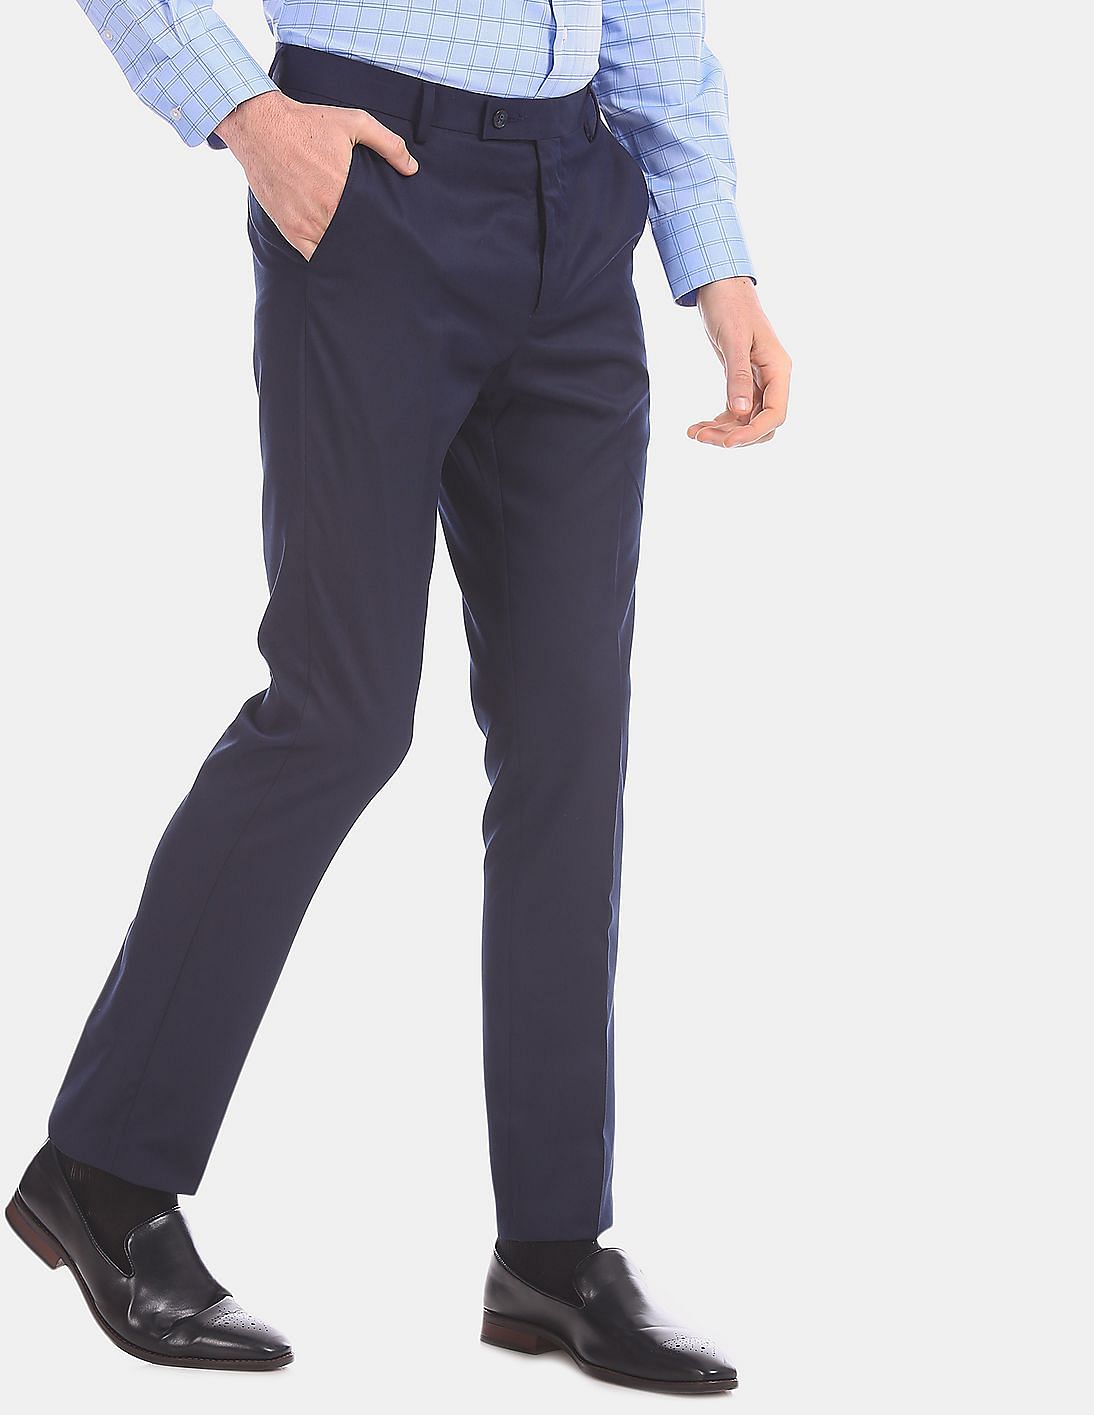 70% Off on Men’s Branded Trousers Starts from Rs. 238